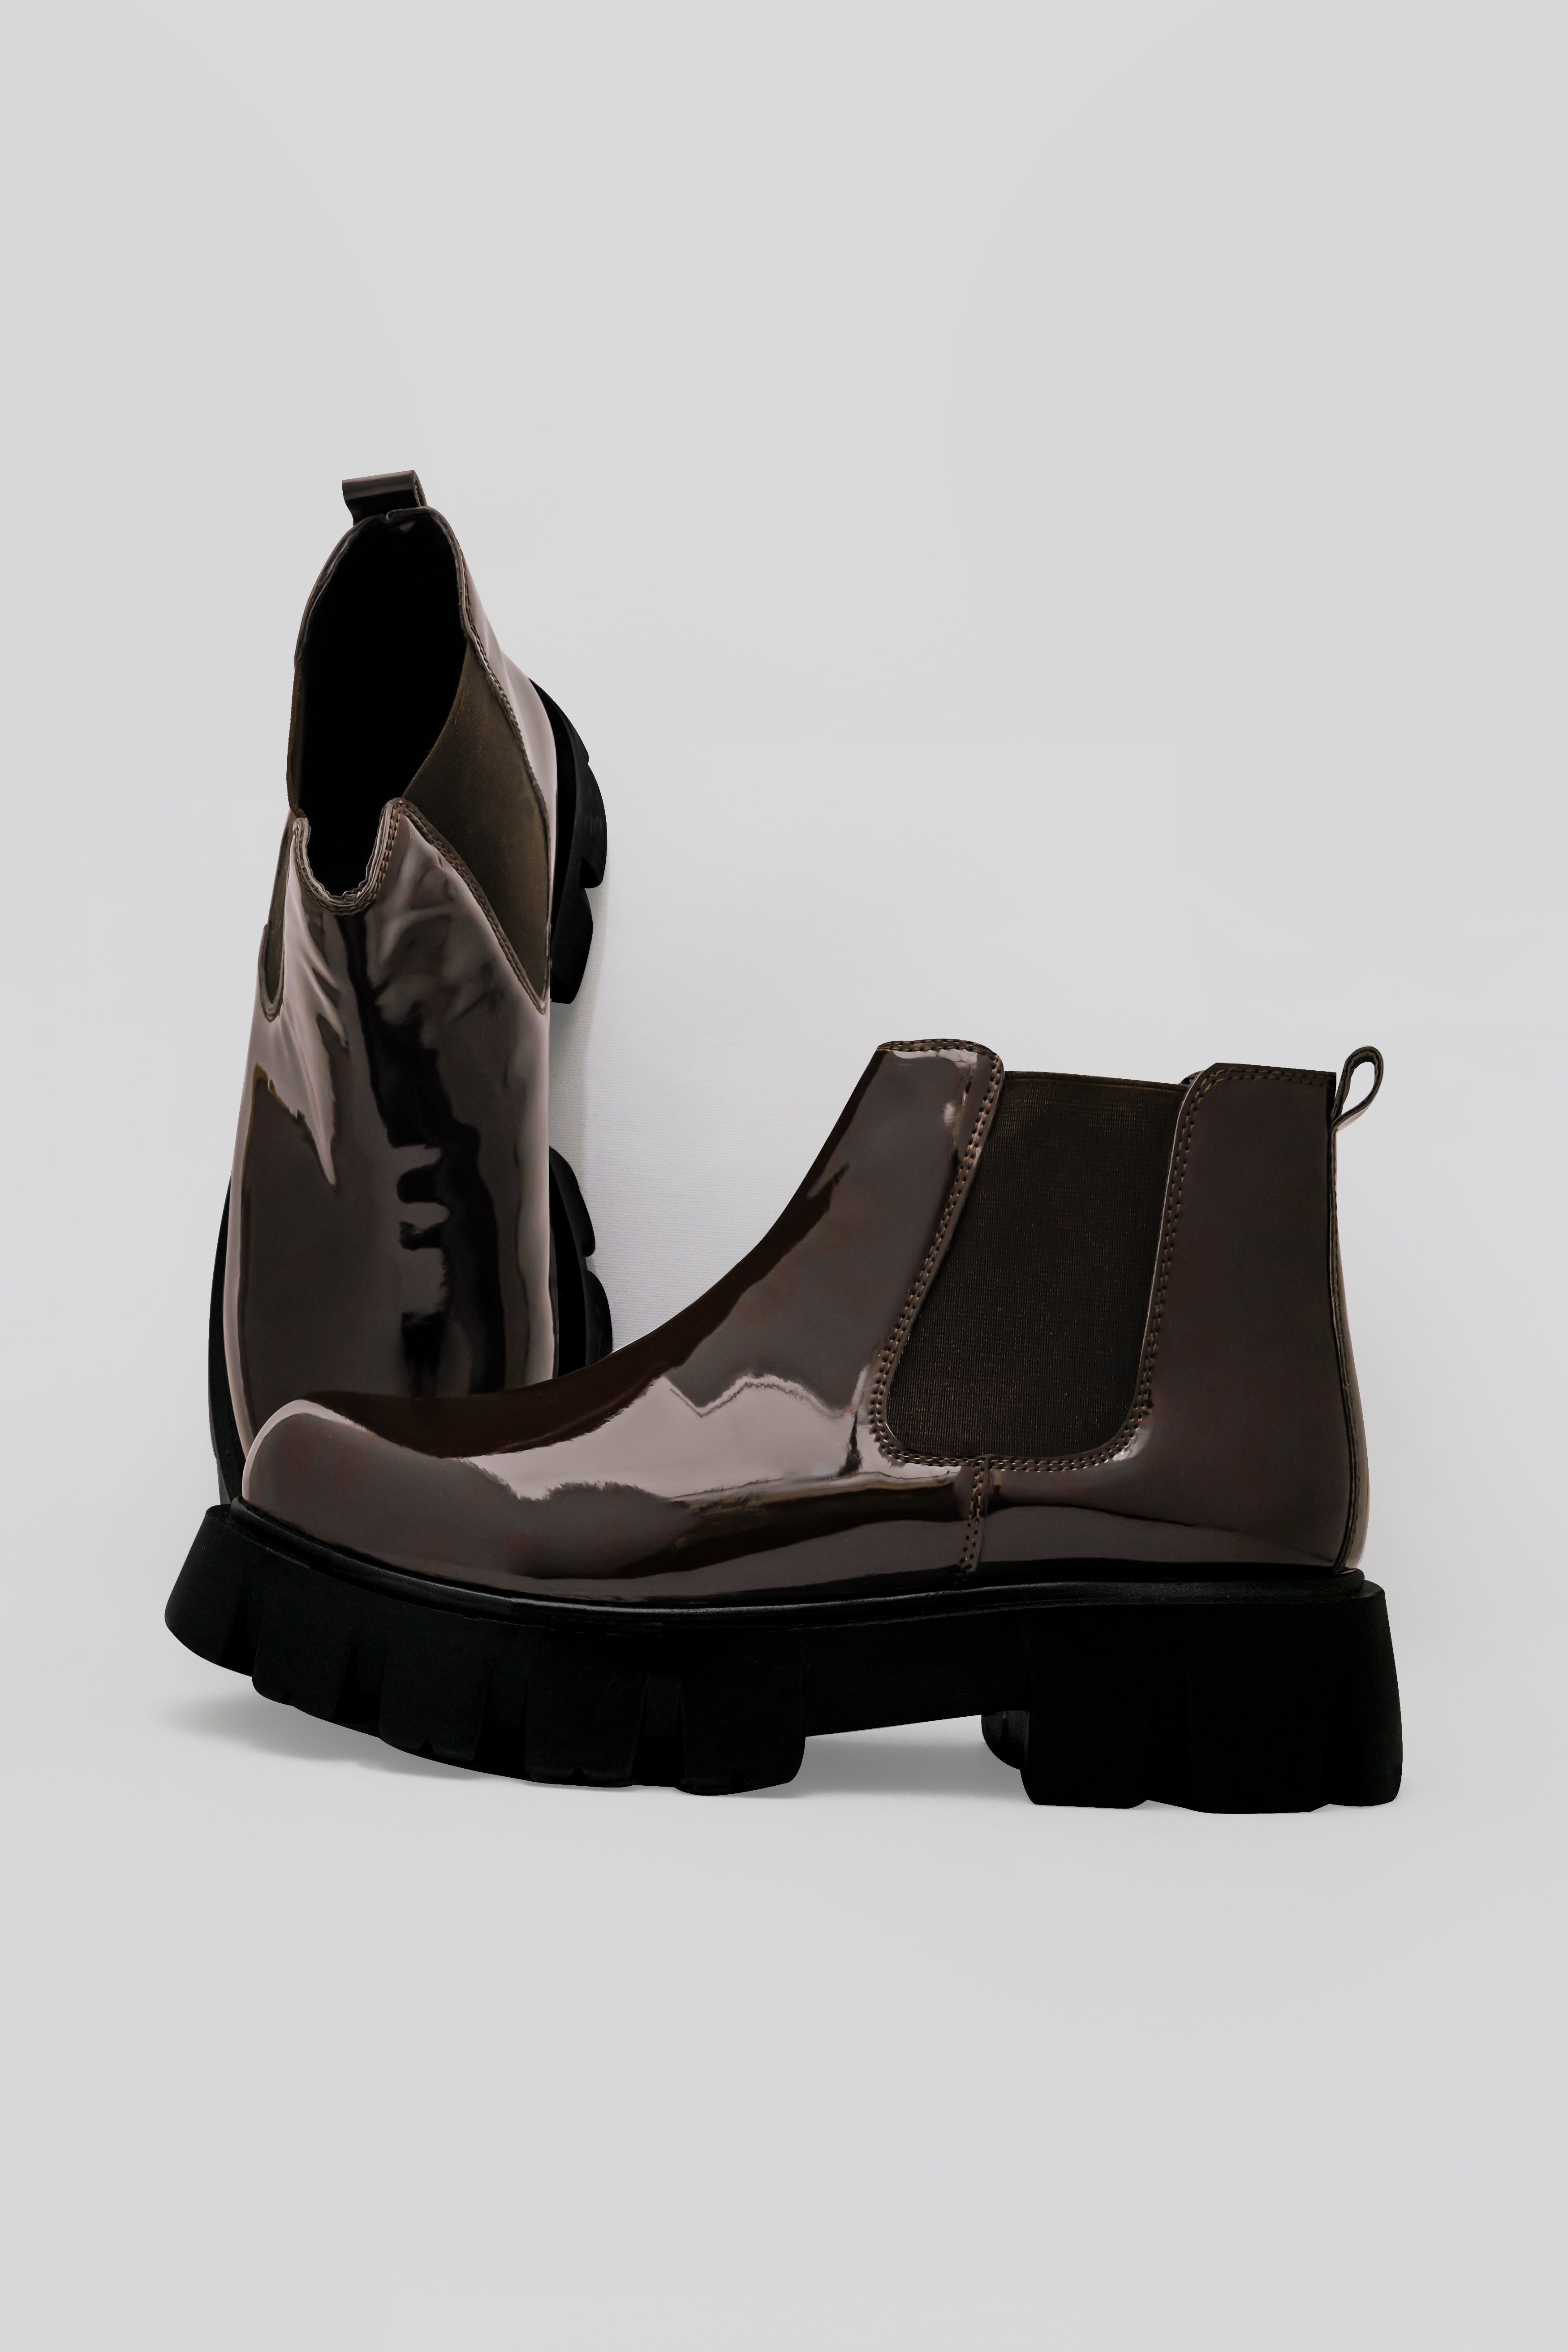 Chocolate Brown Vegan Leather Chelsea Boots  FT112-6, FT112-7, FT112-8, FT112-9, FT112-10, FT112-11